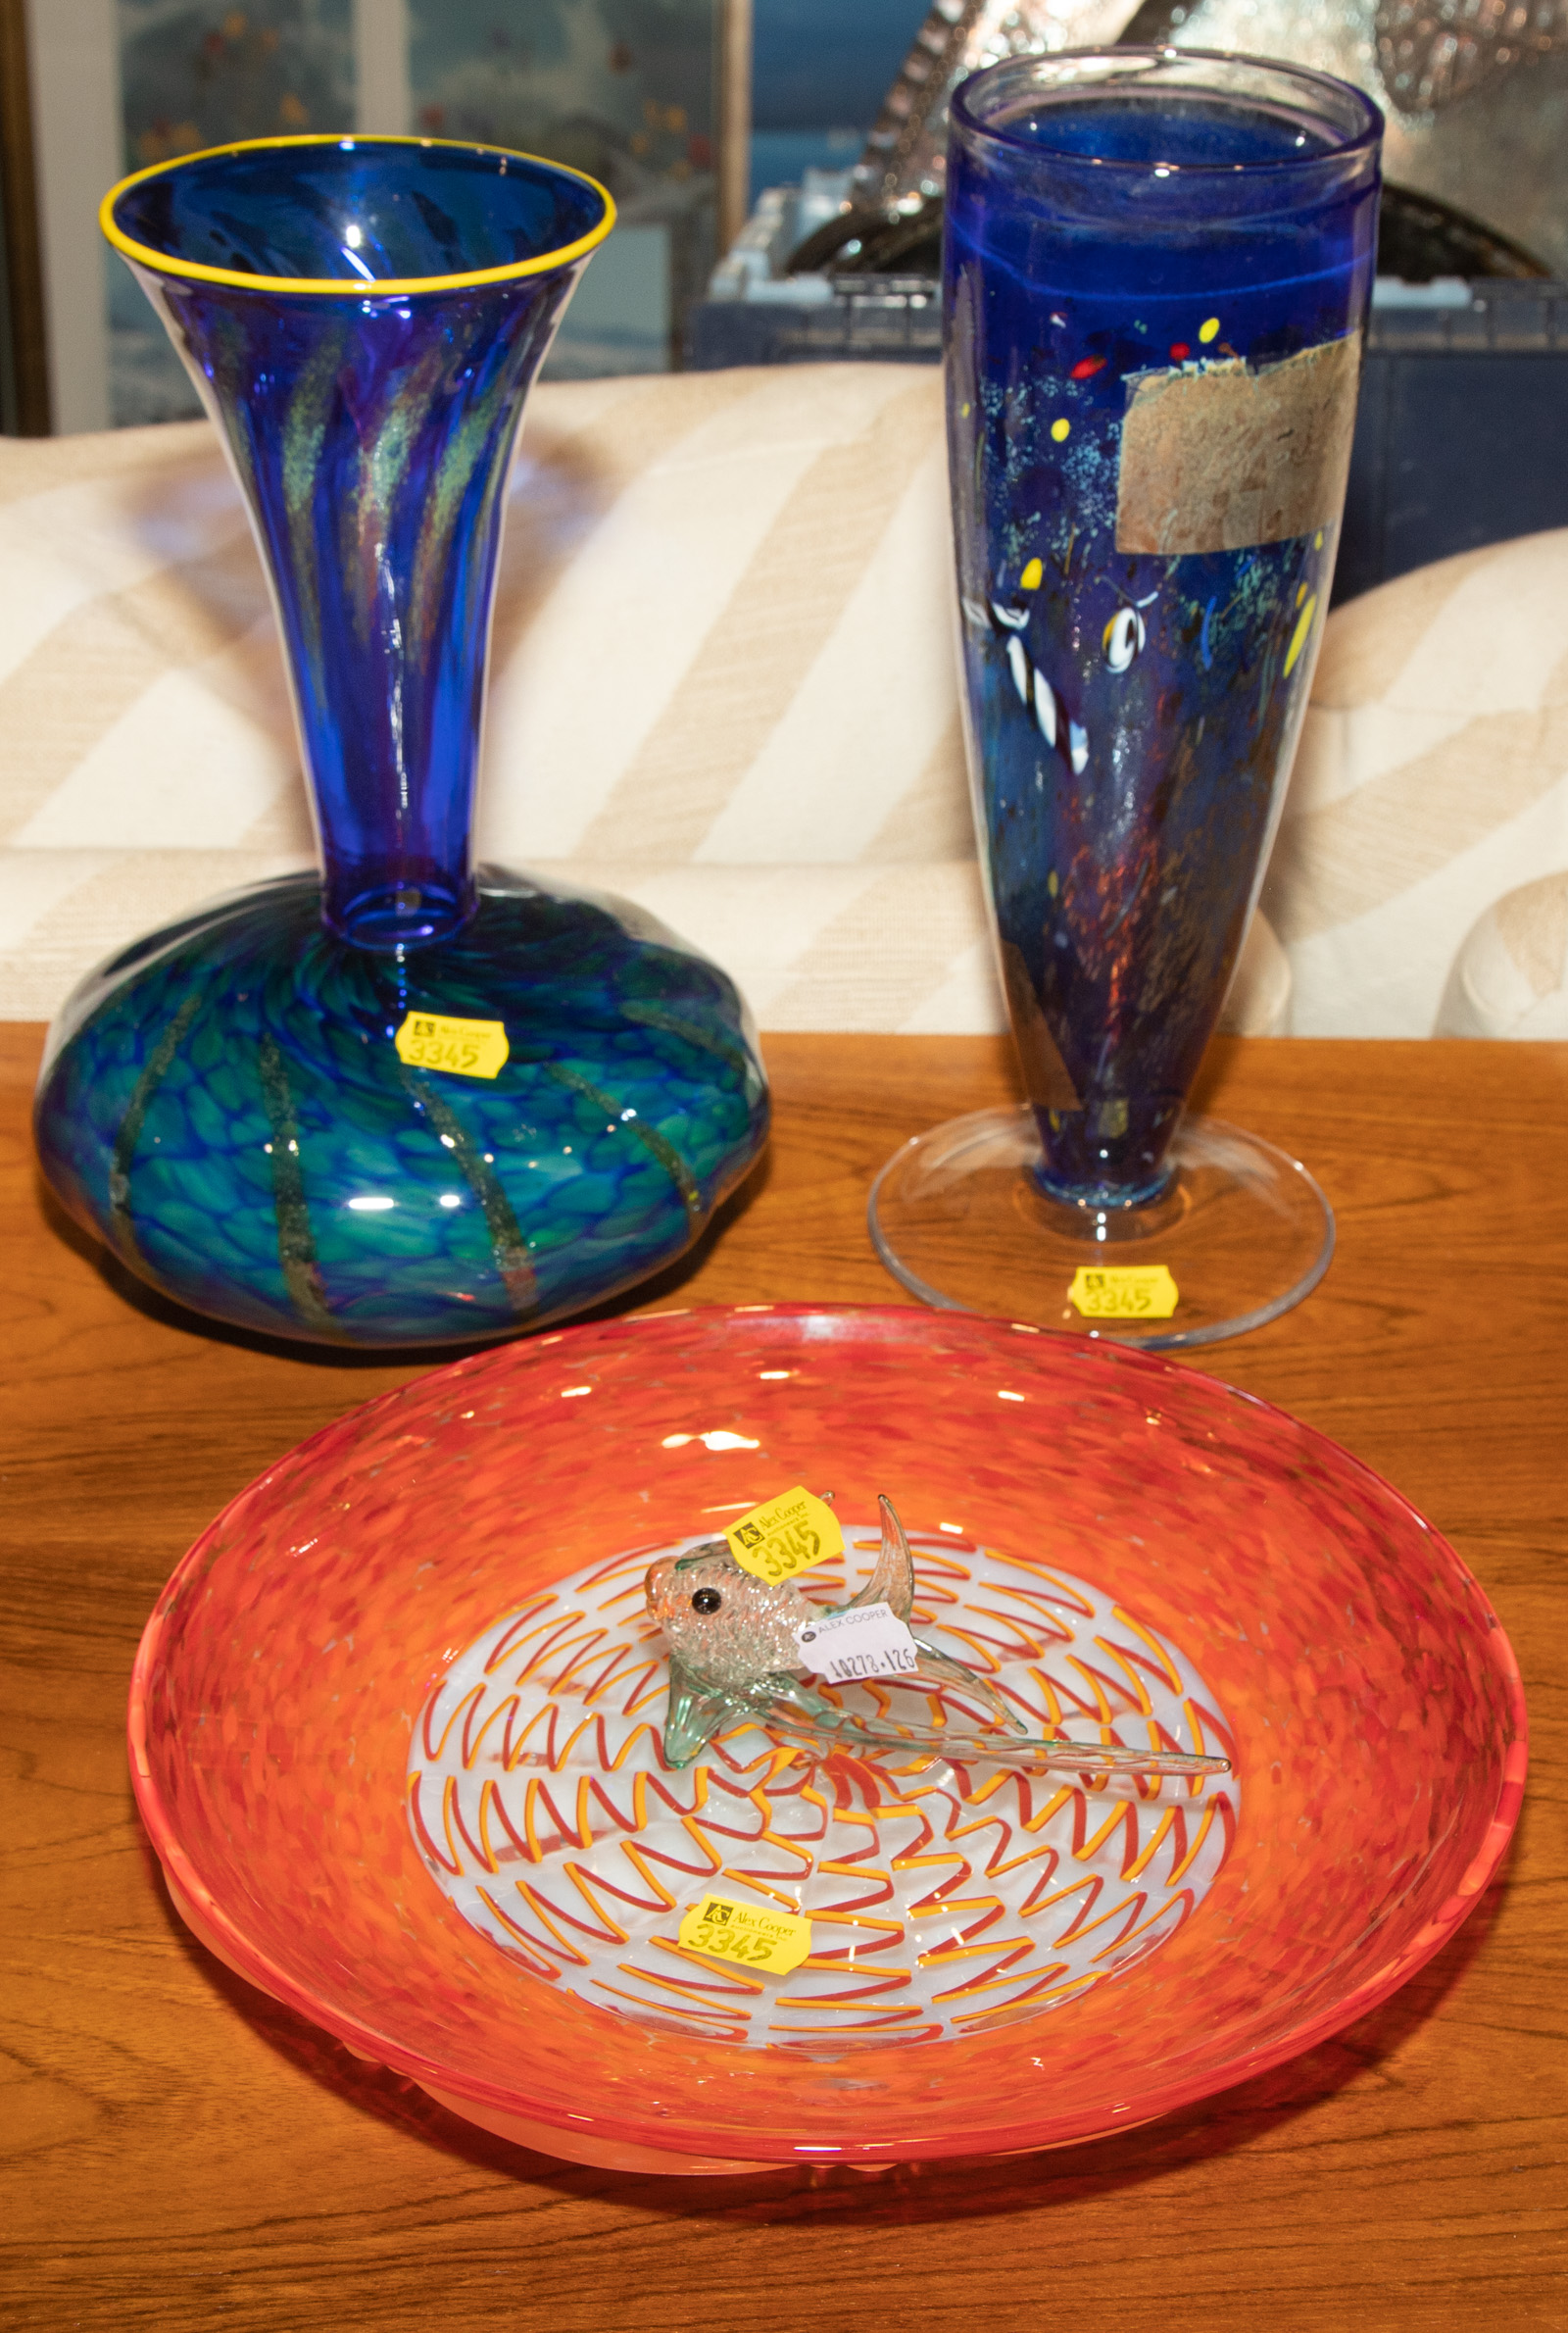 A SELCETION OF ART GLASS Including